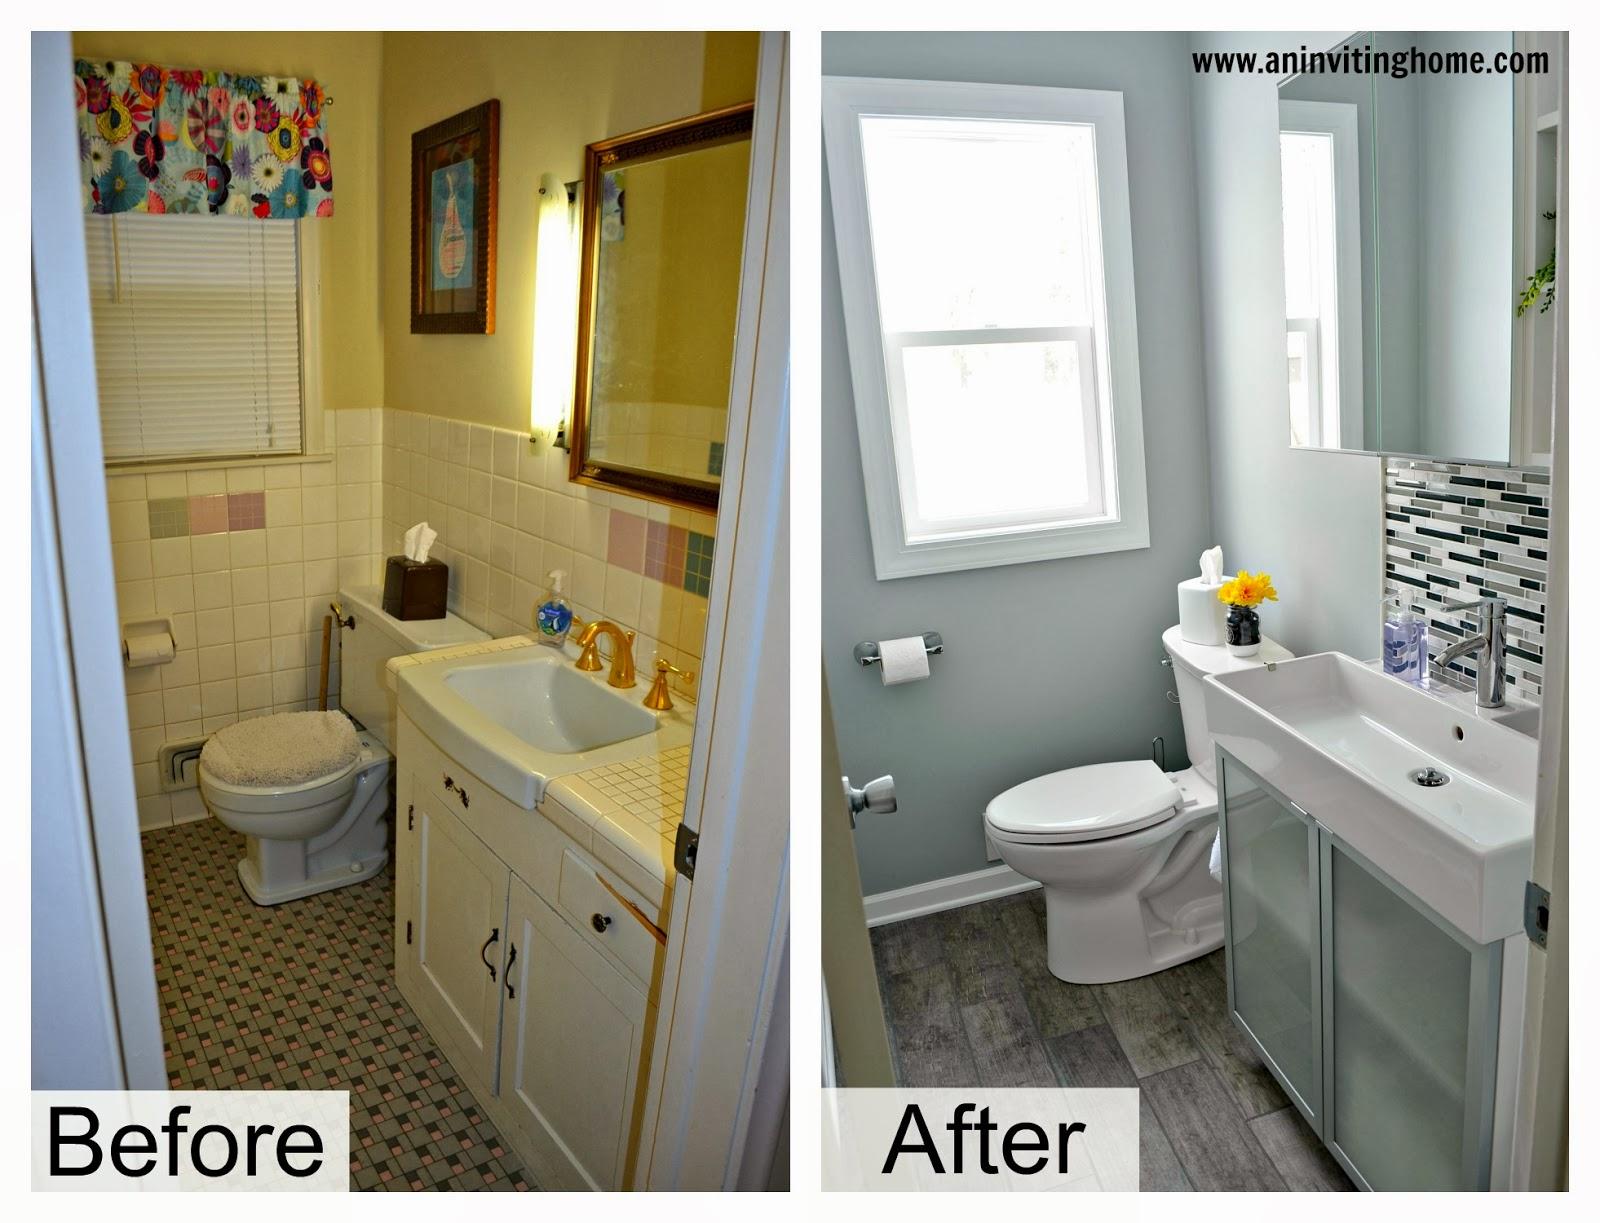 10 Bathroom Remodeling Ideas Lovely Spaces